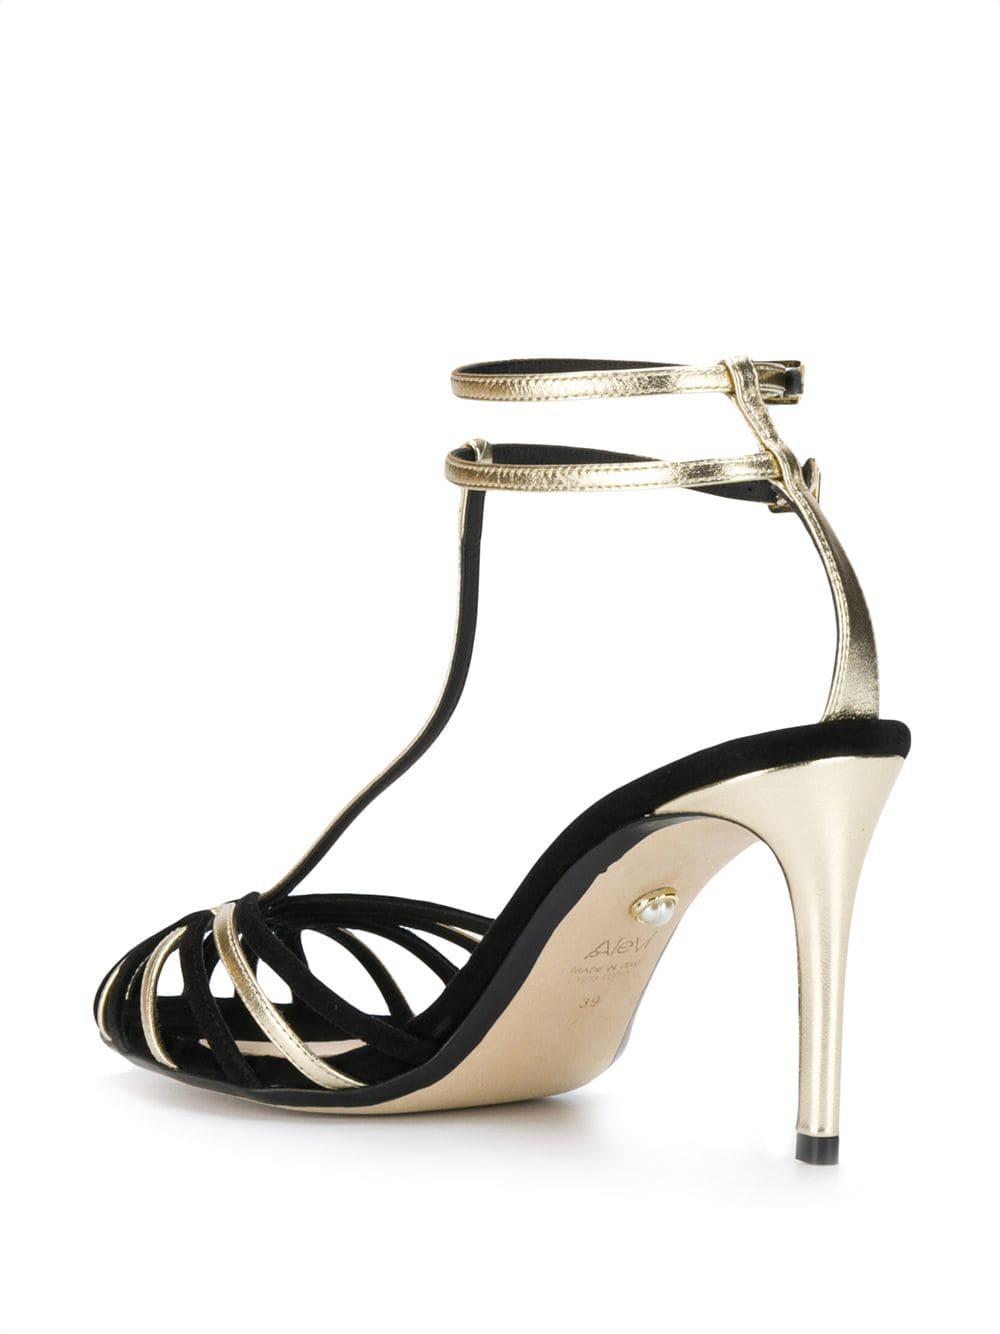 ALEVI Leather Strappy Heeled Sandals in Black - Lyst